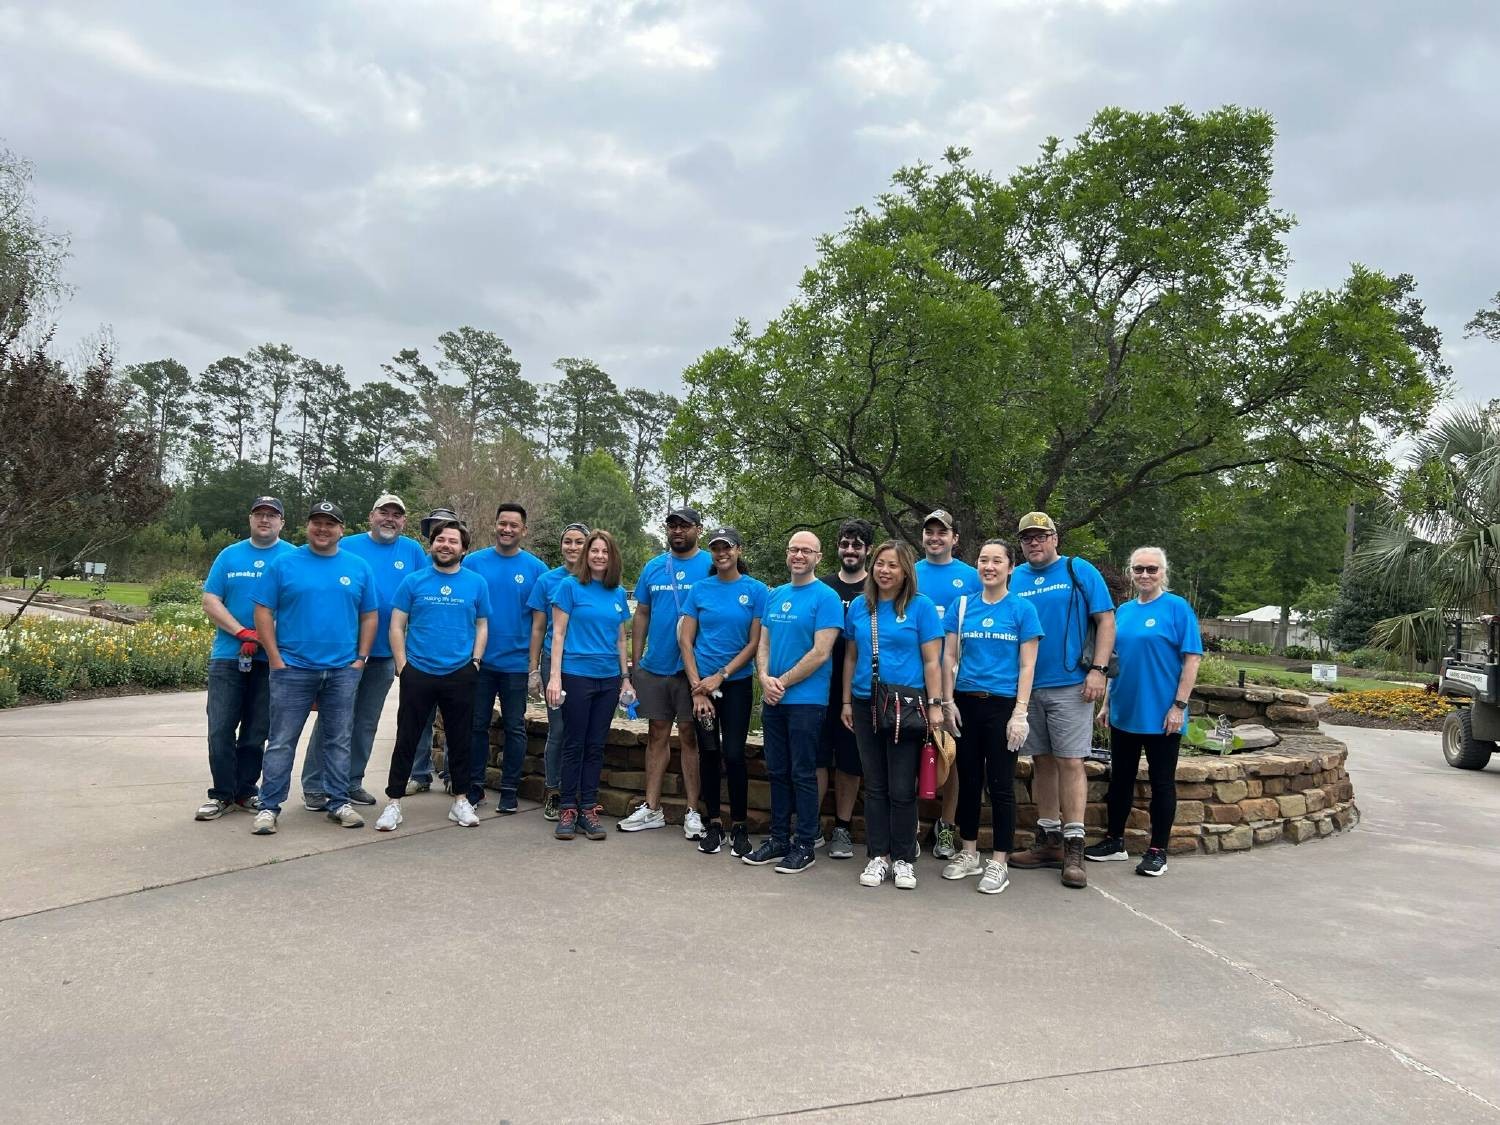 HP Houston Earth Day Cleanup at Mercer Arboretum and Botanic Gardens. Photo by HP.